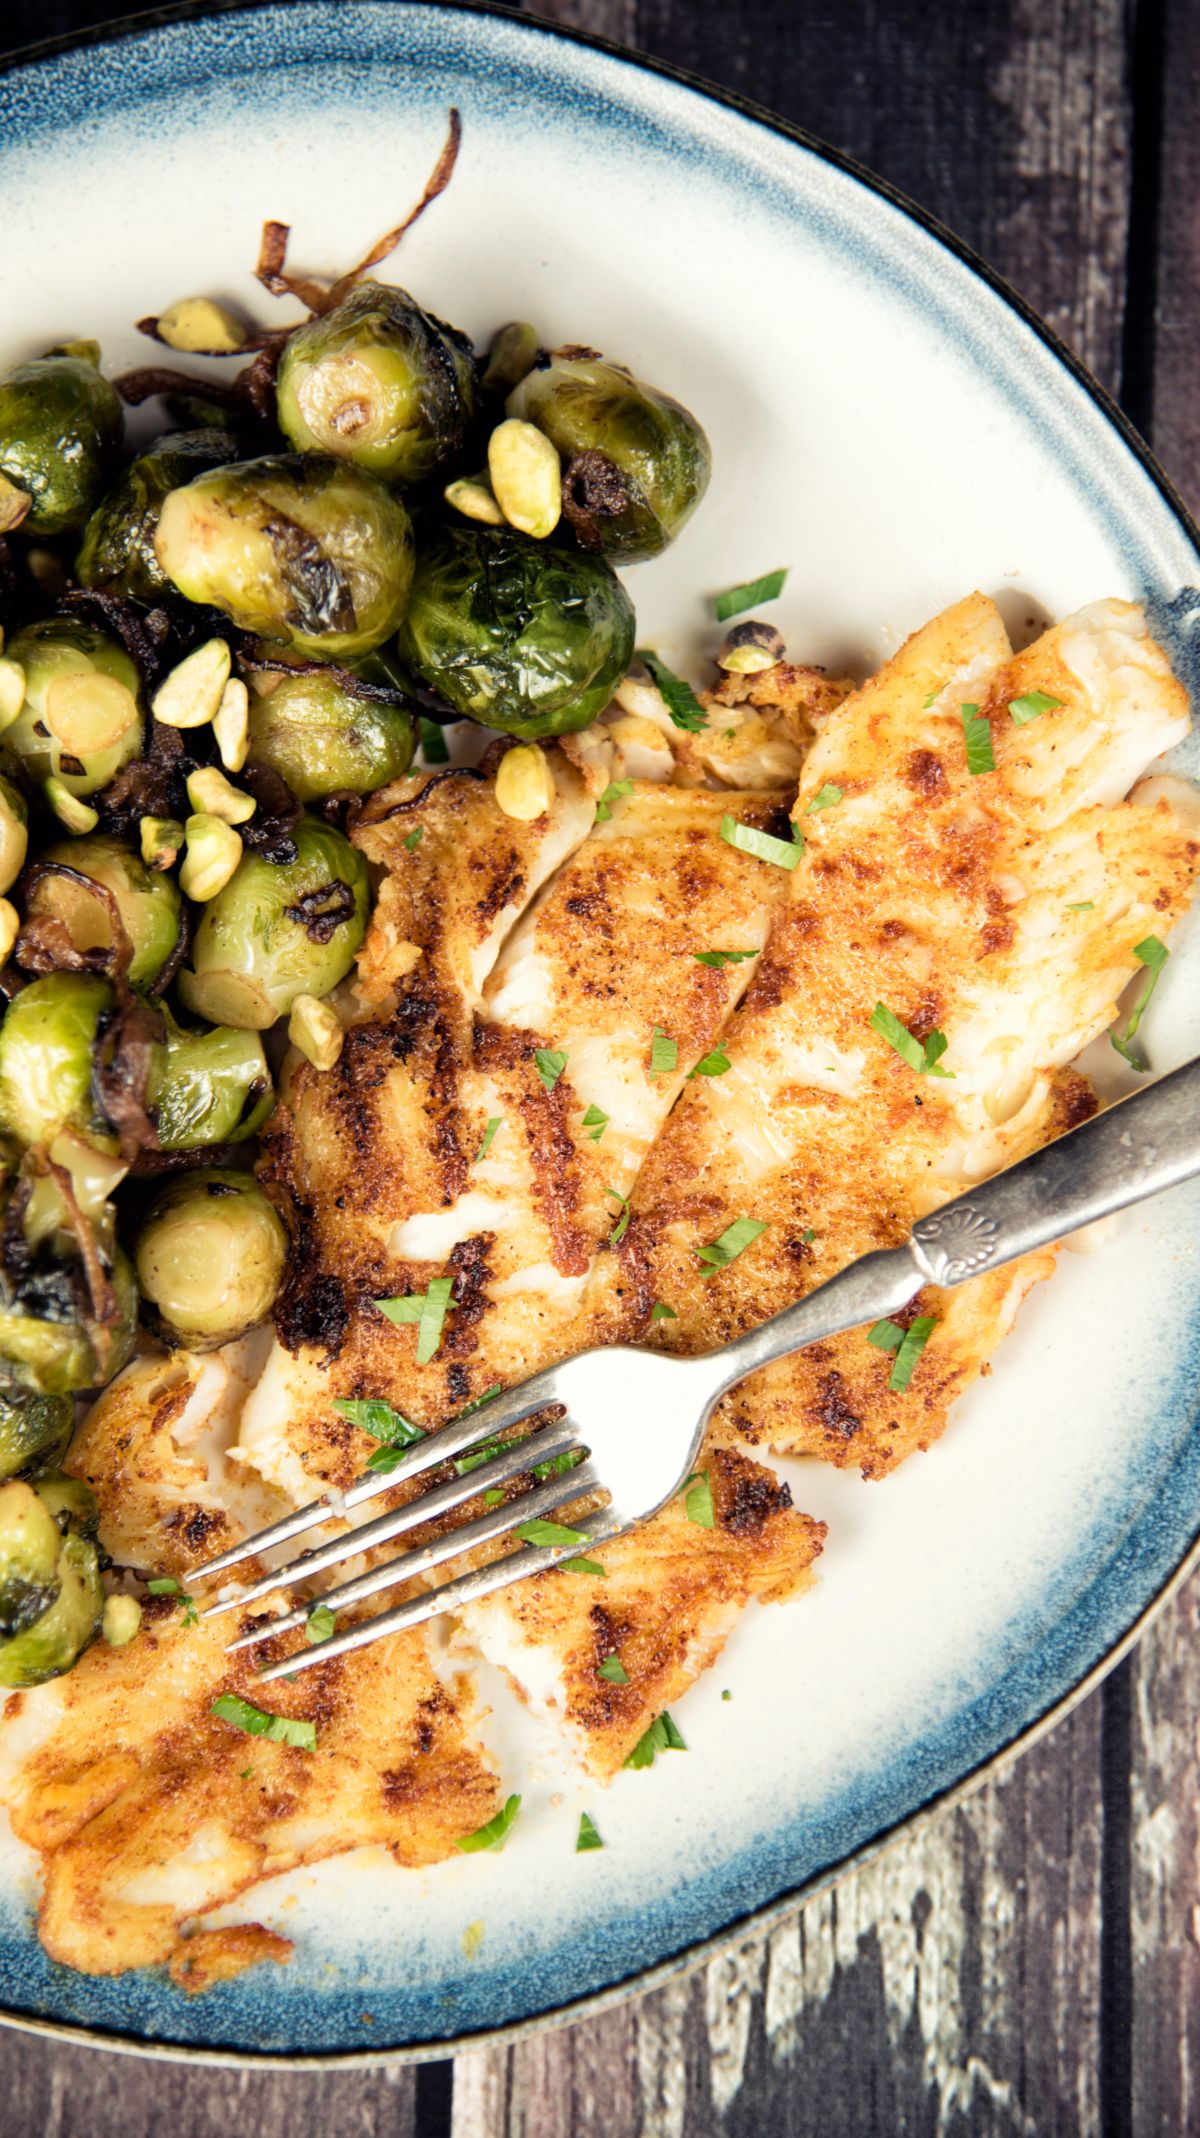 Grilled Seabass with Caramelized Brussels Sprouts on a plate with a fork.